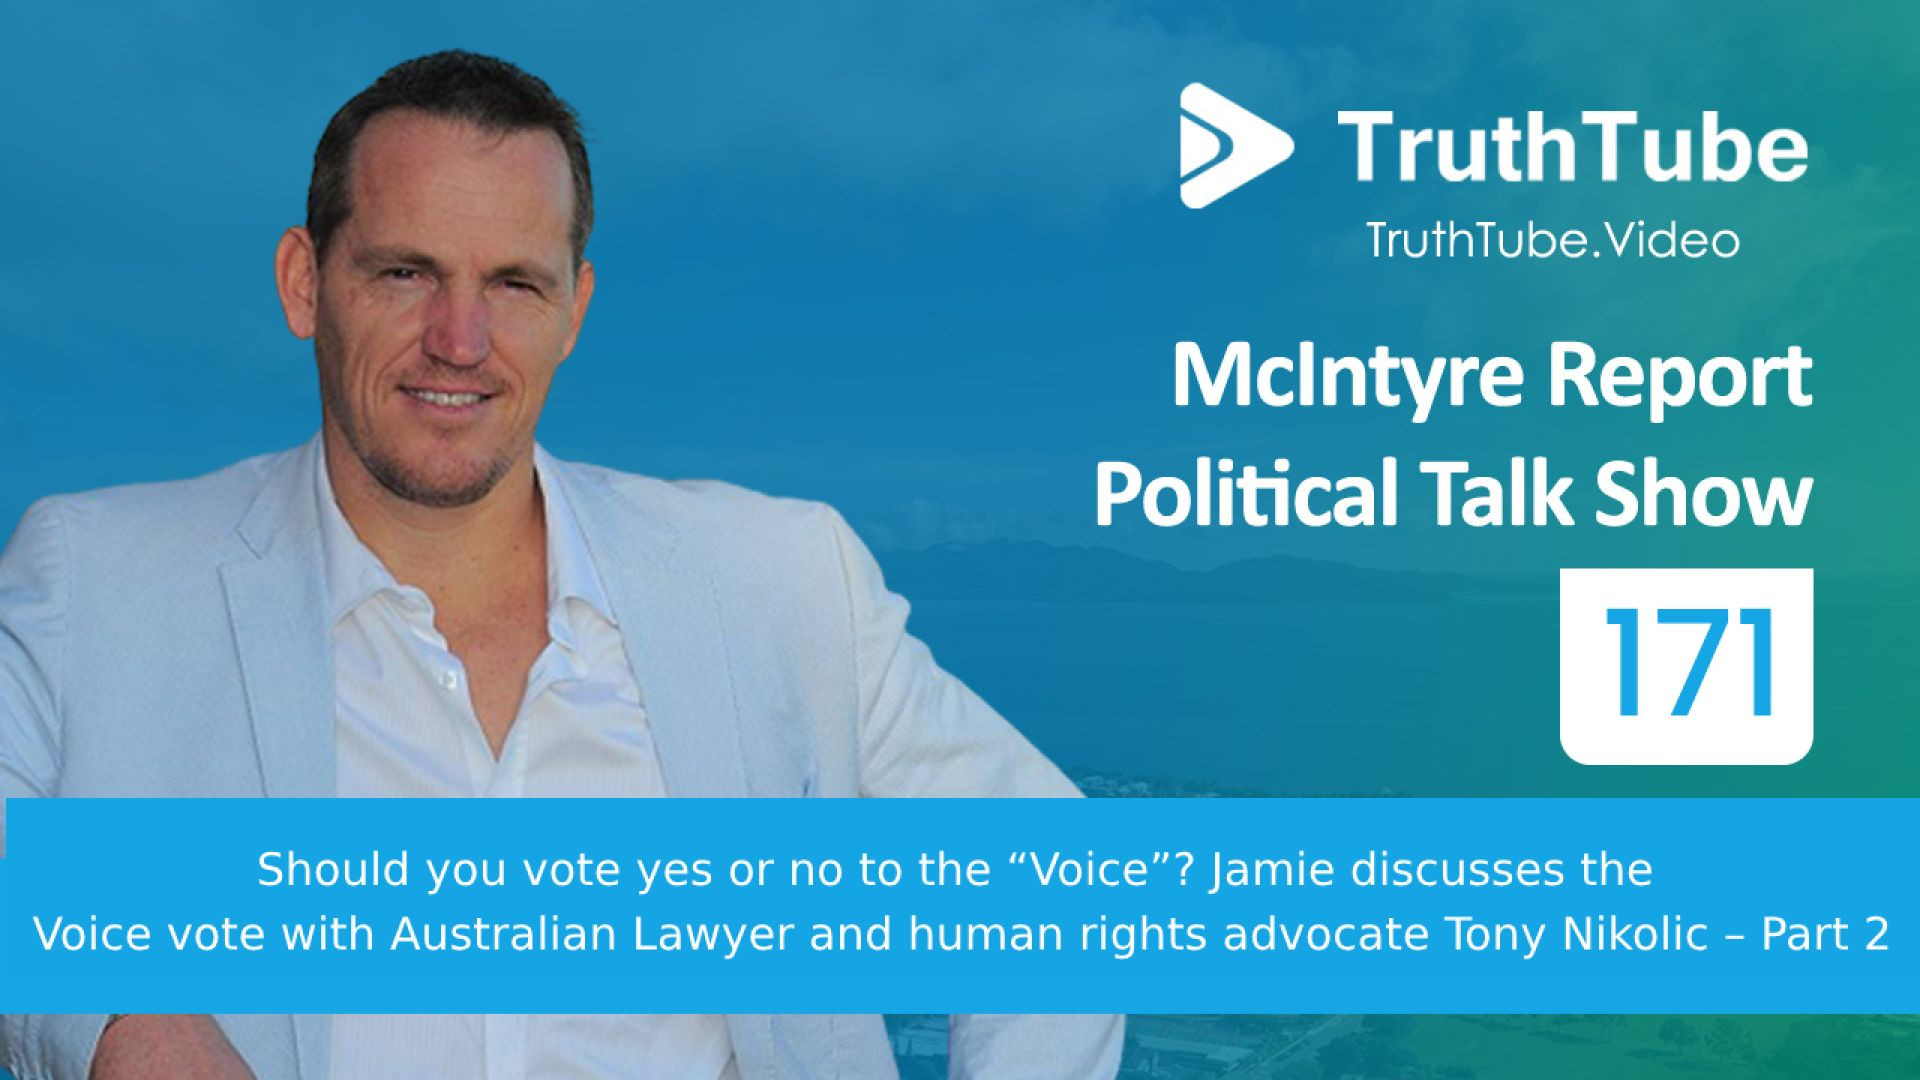 Should you vote yes or no to the “Voice” ? Jamie discusses the Voice vote with Australian Lawyer and